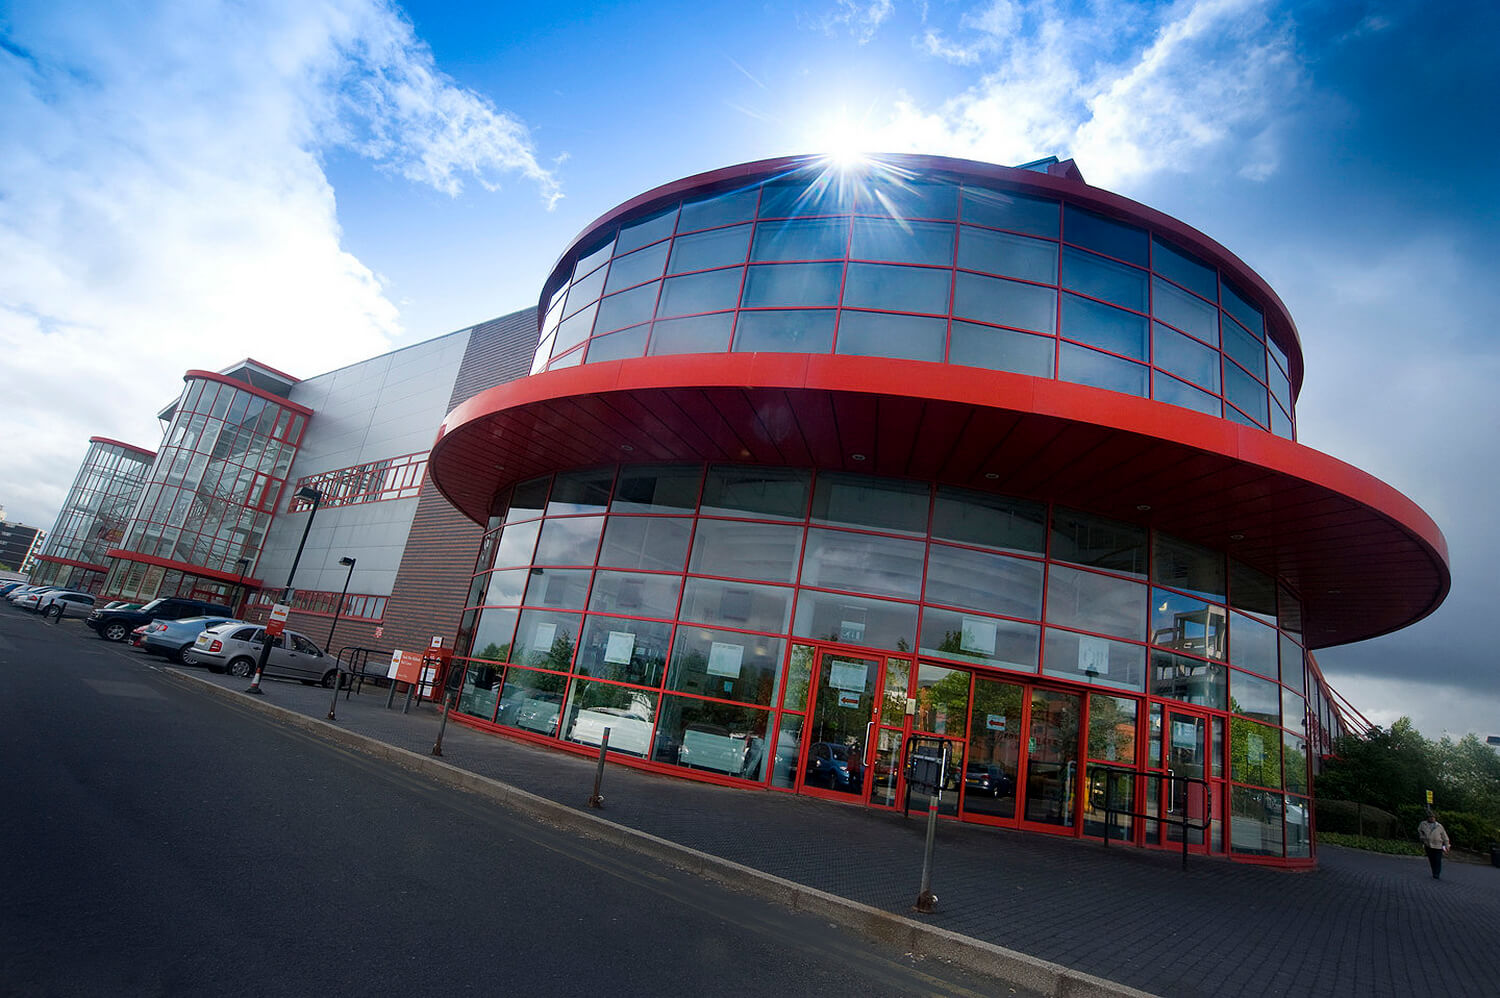 Commercial property photography, interior and exterior, Royal Mail HQ in Wolverhampton, Birmingham for portfolio